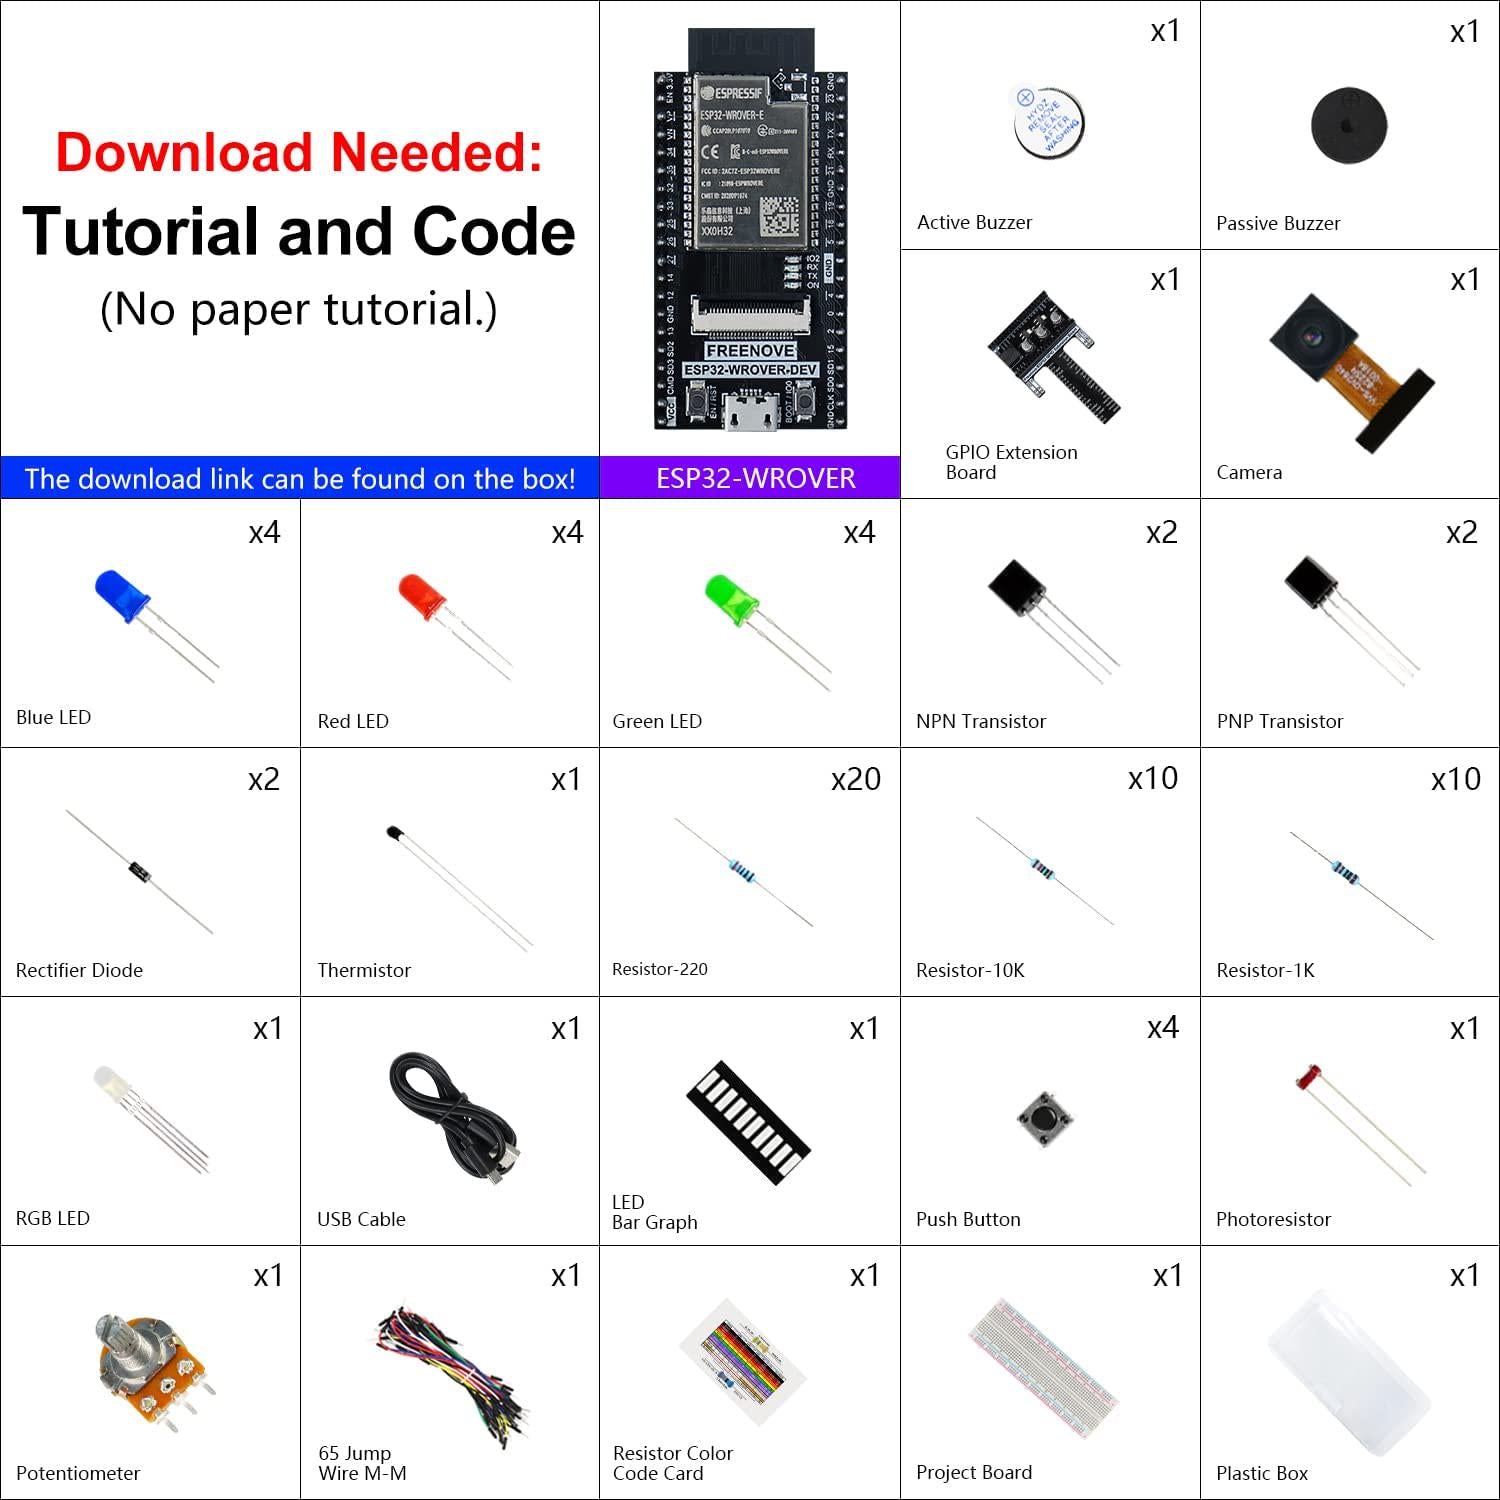 Freenove, Freenove Basic Starter Kit for ESP32-WROVER (Included) (Compatible with Arduino IDE), Onboard Camera Wireless, Python C, 401-Page Detailed Tutorial, 141 Items, 61 Projects